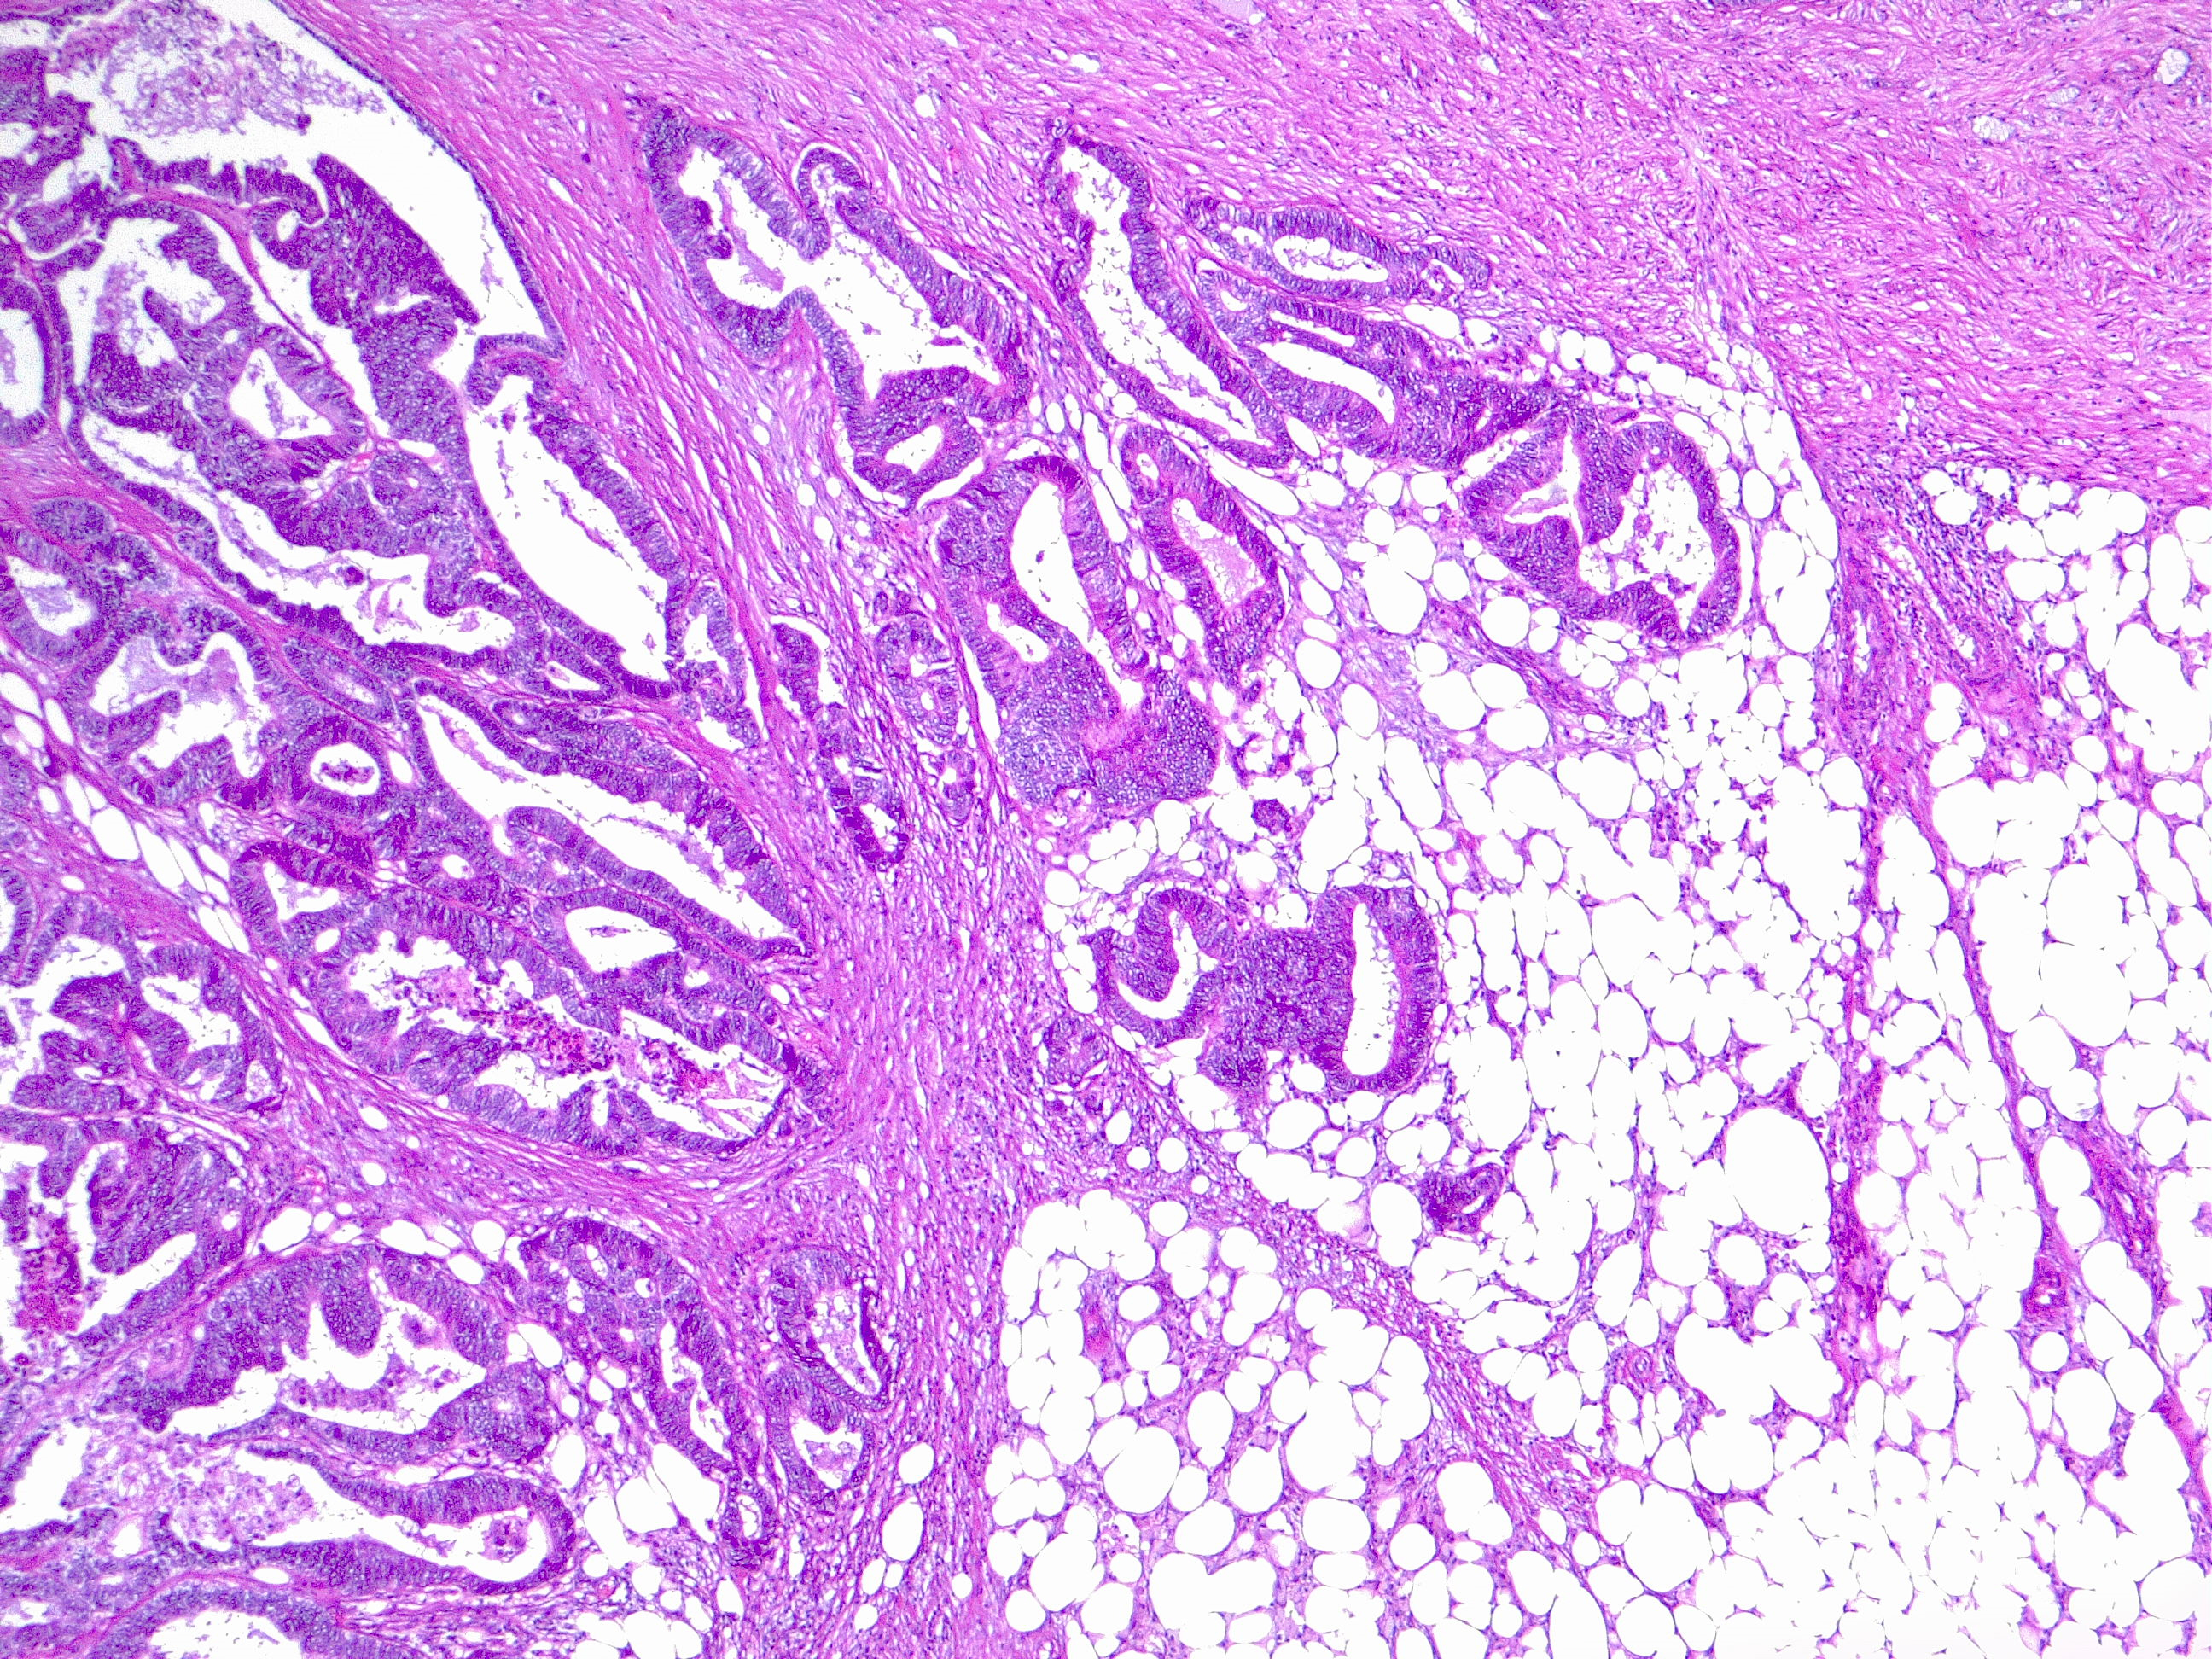 Colorectal cancer (CRC). In this image the neoplastic glands infiltrate the pericolic adipose tissue; this finding classifies as colorectal adenocarcinoma TNM stage pT3 (pathological staging). 